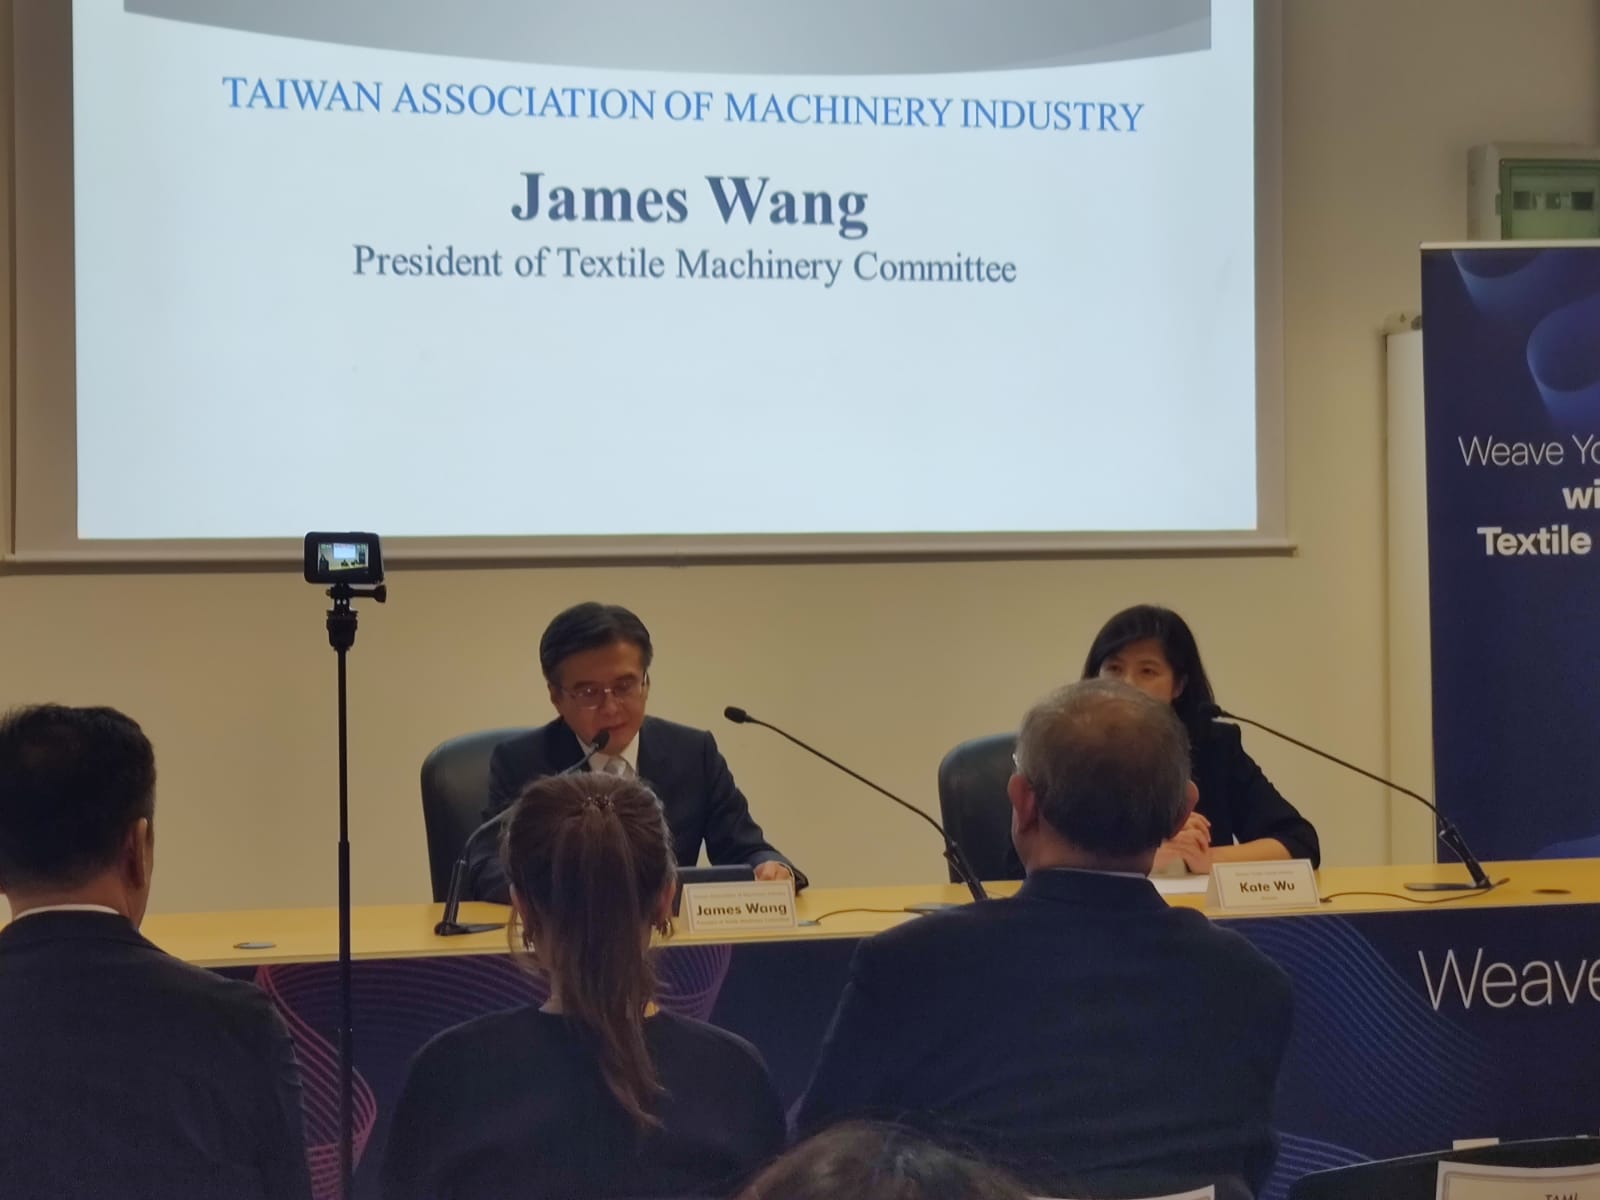 Taiwan Smart Manufacturing shines with technological prowess at ITMA 2023